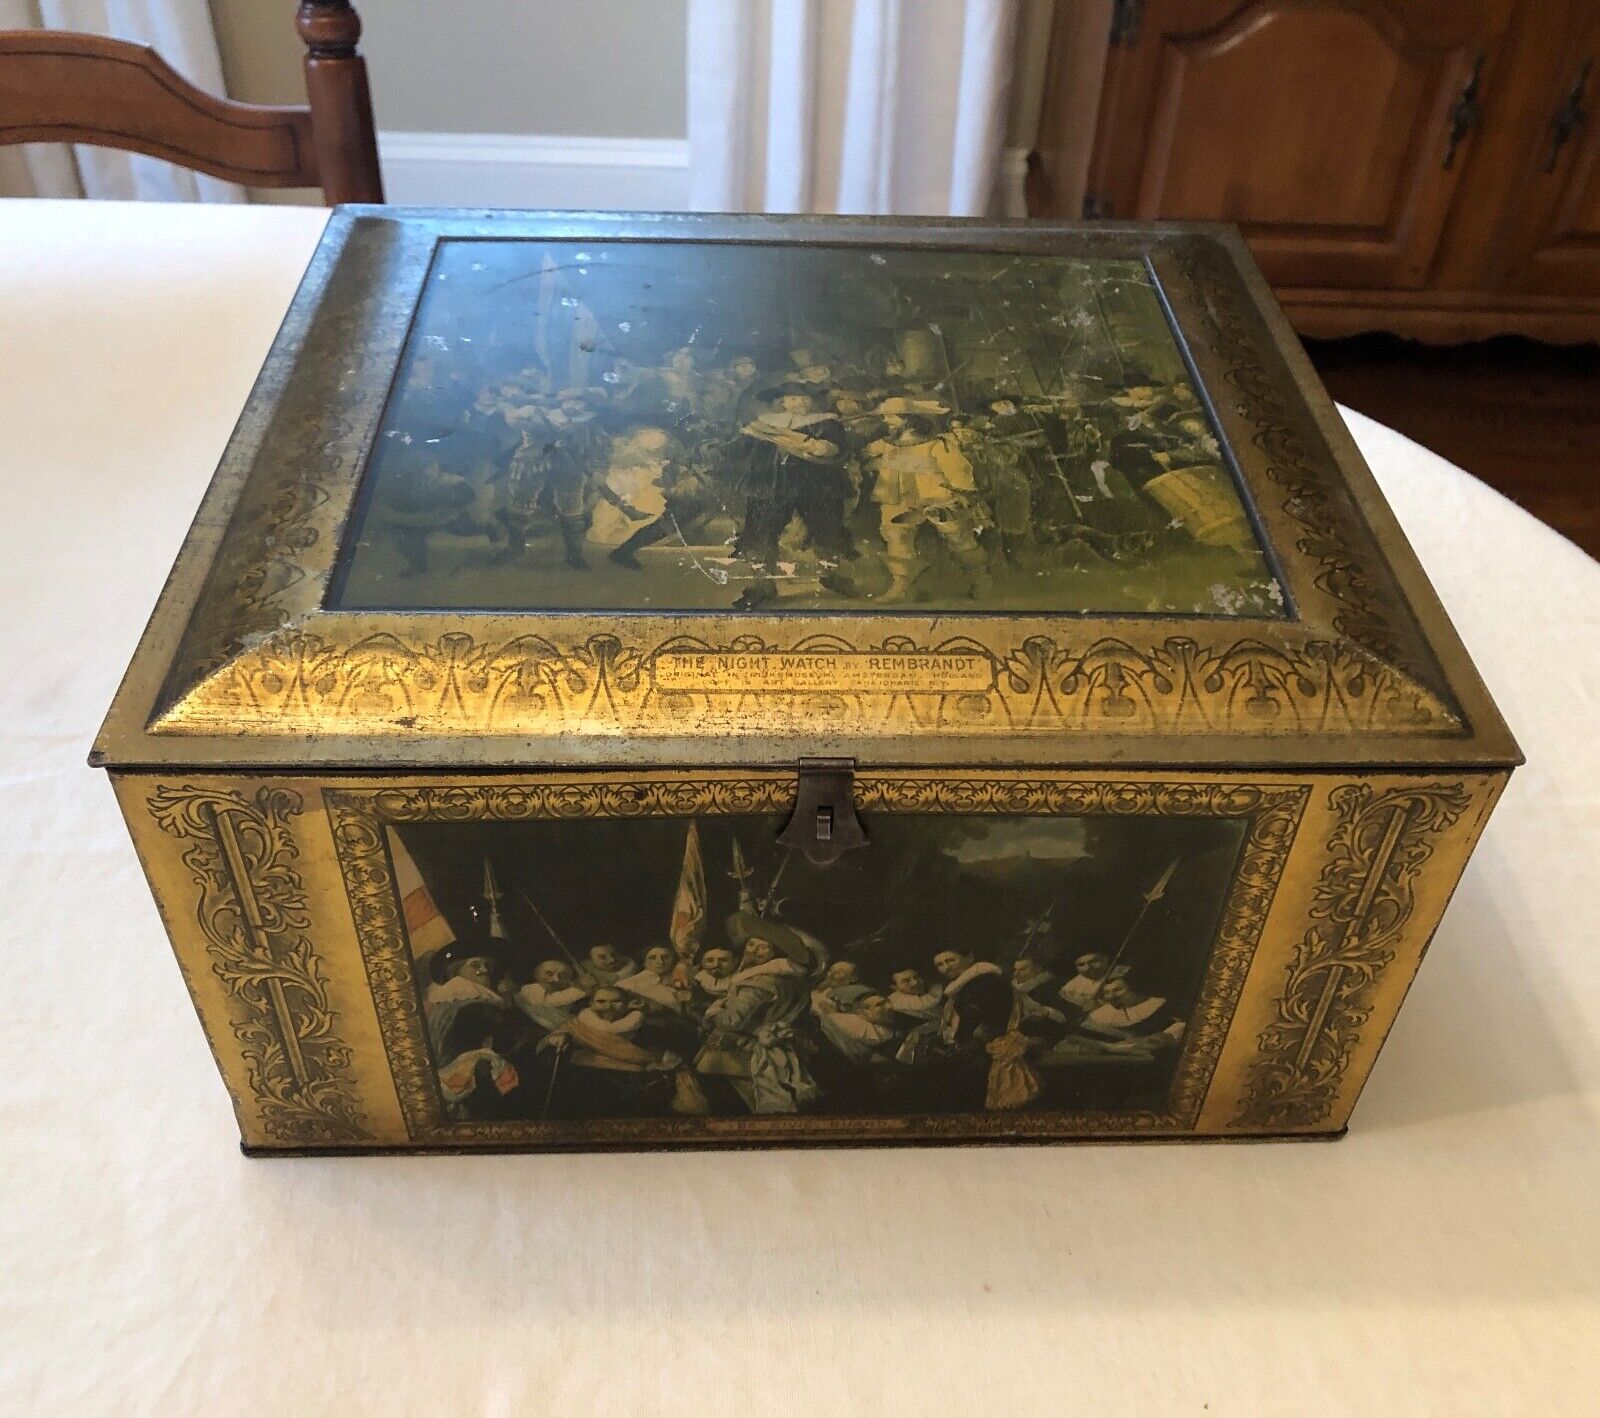 Large Beech Nut Storage Tin 1930s Nightwatch by Rembrandt Litho Paintings